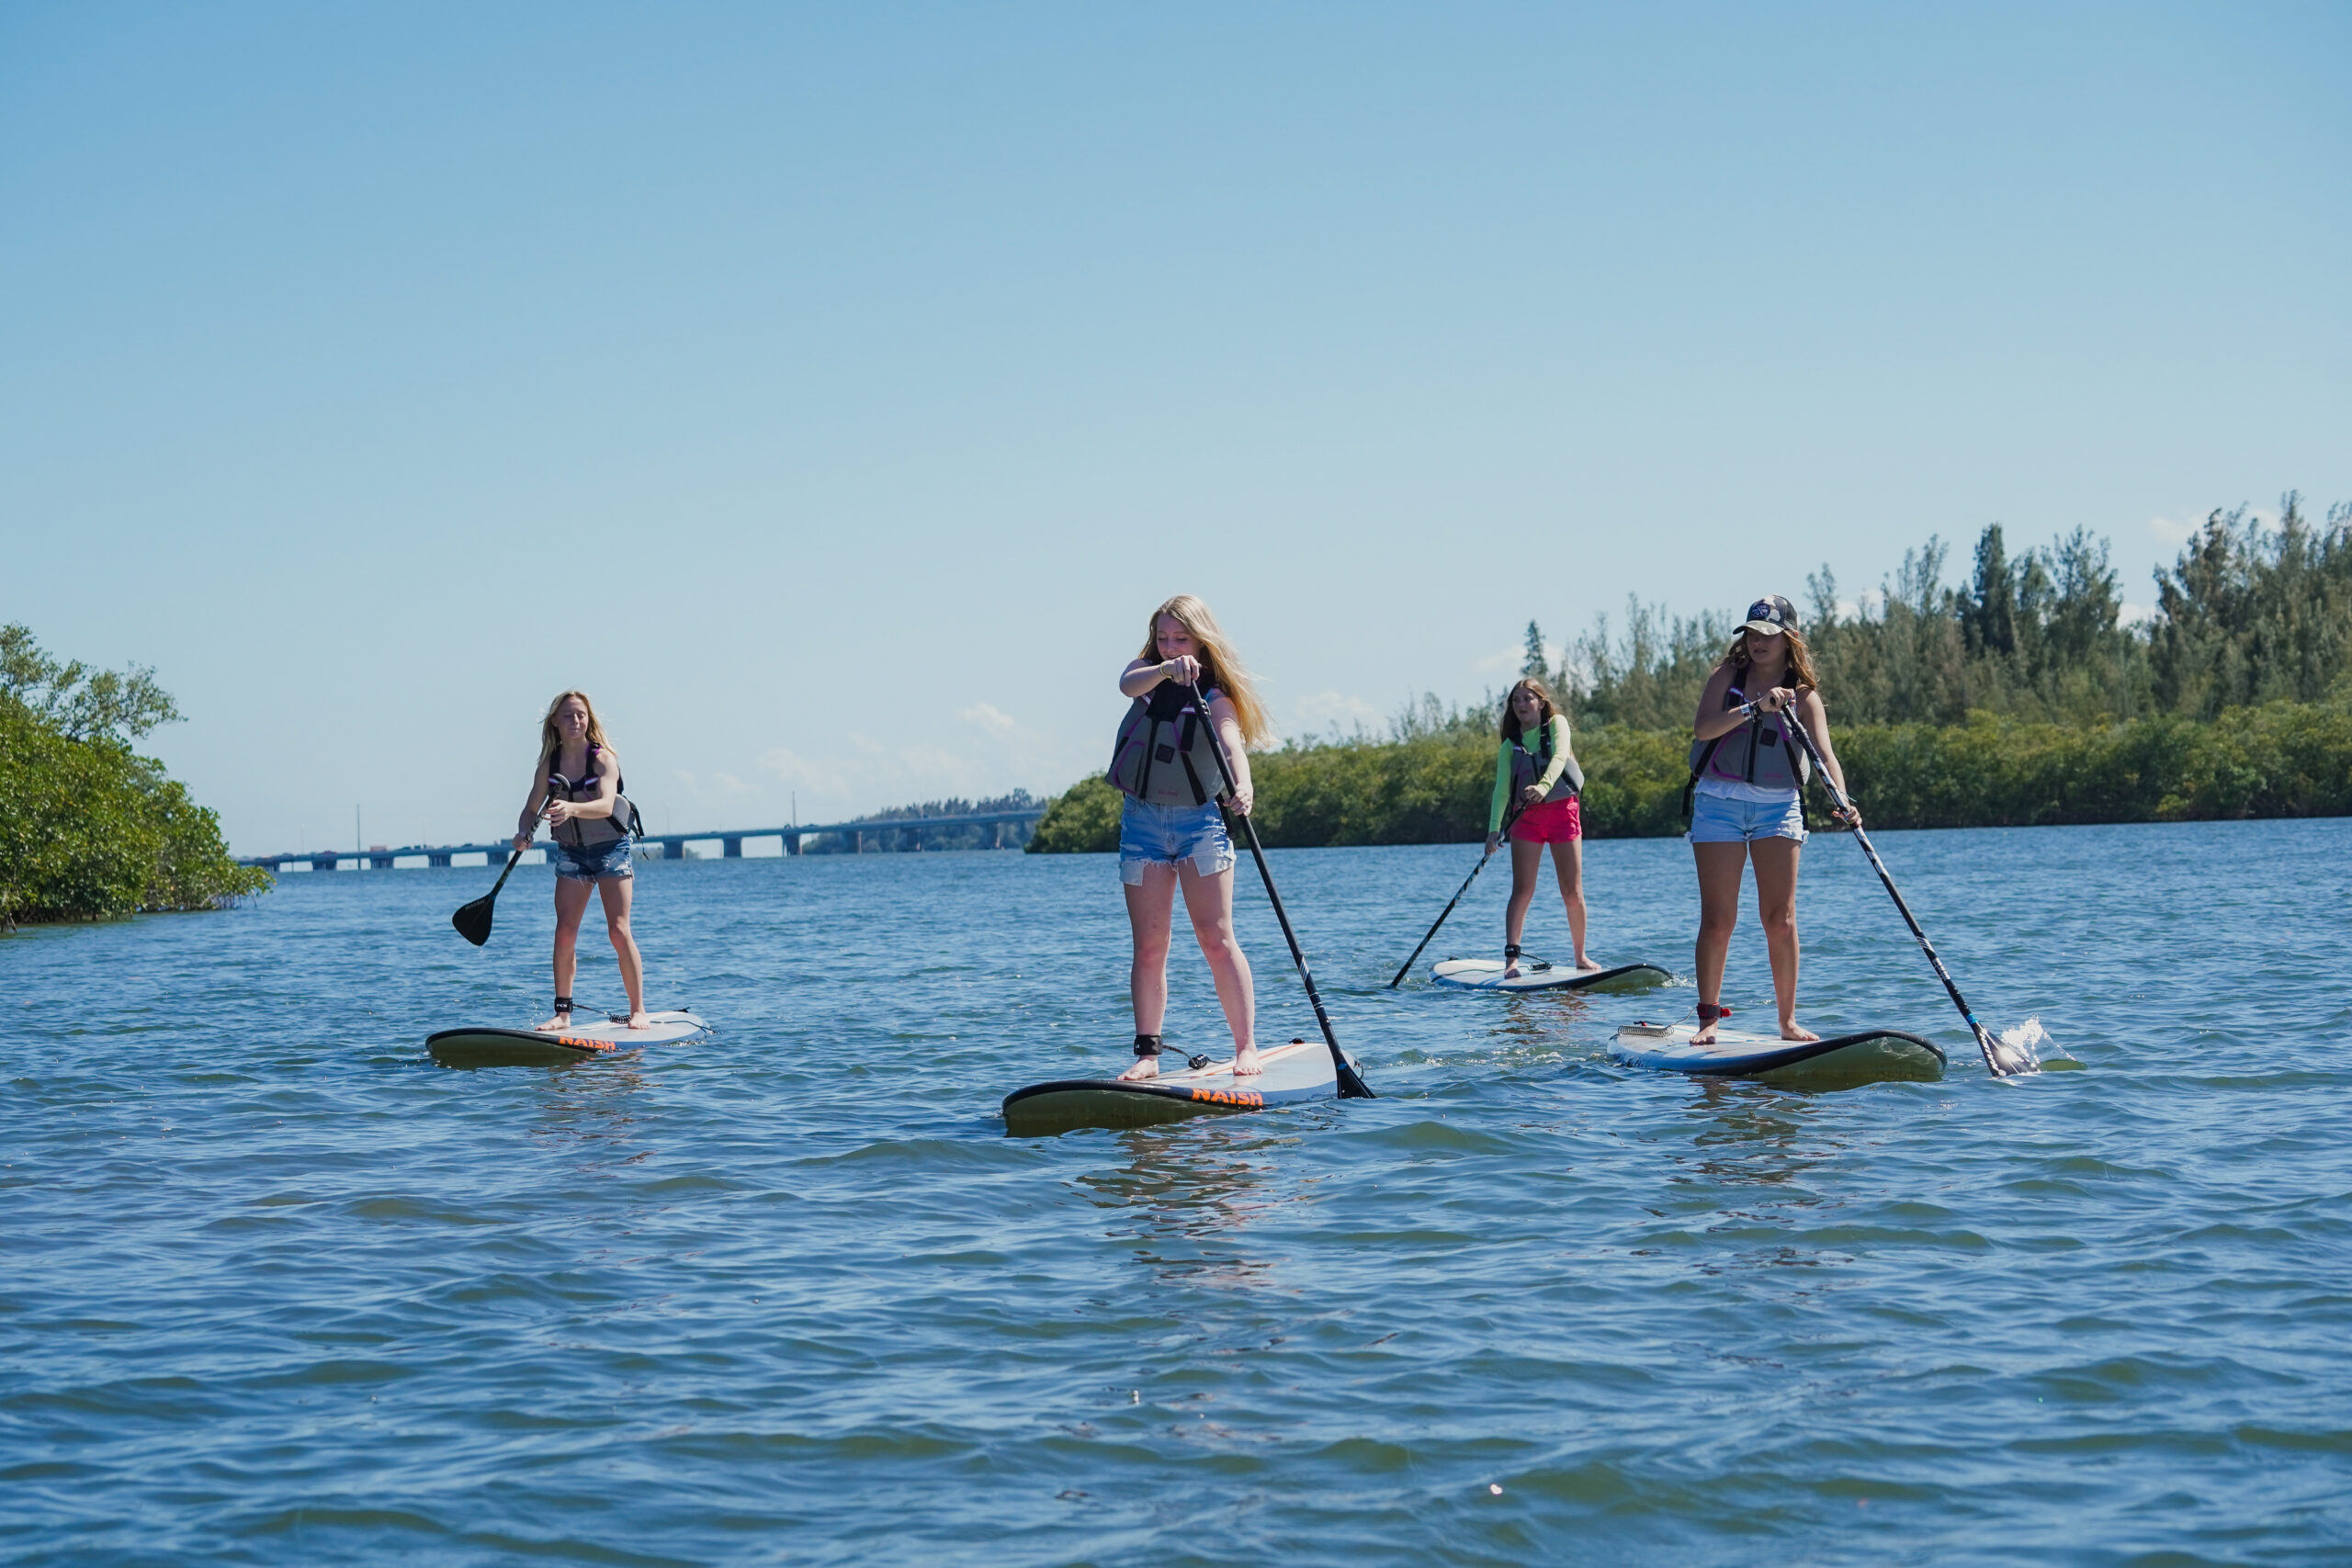 Learn more about Stand up Paddleboarding.